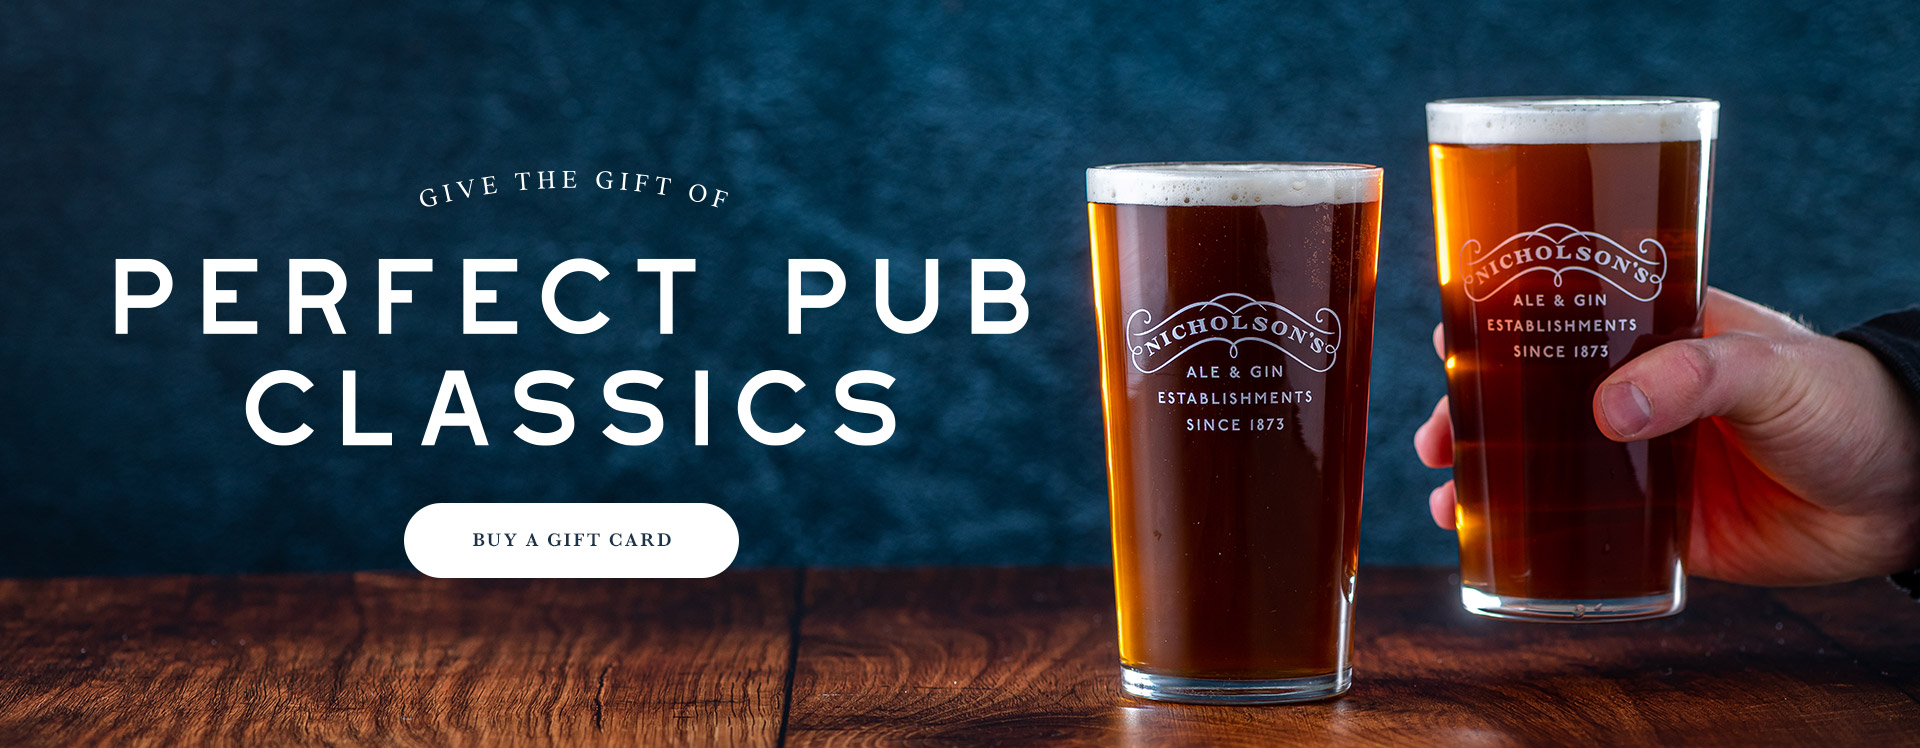 Nicholson’s Pub Gift Voucher at Doggett's Coat and Badge in London